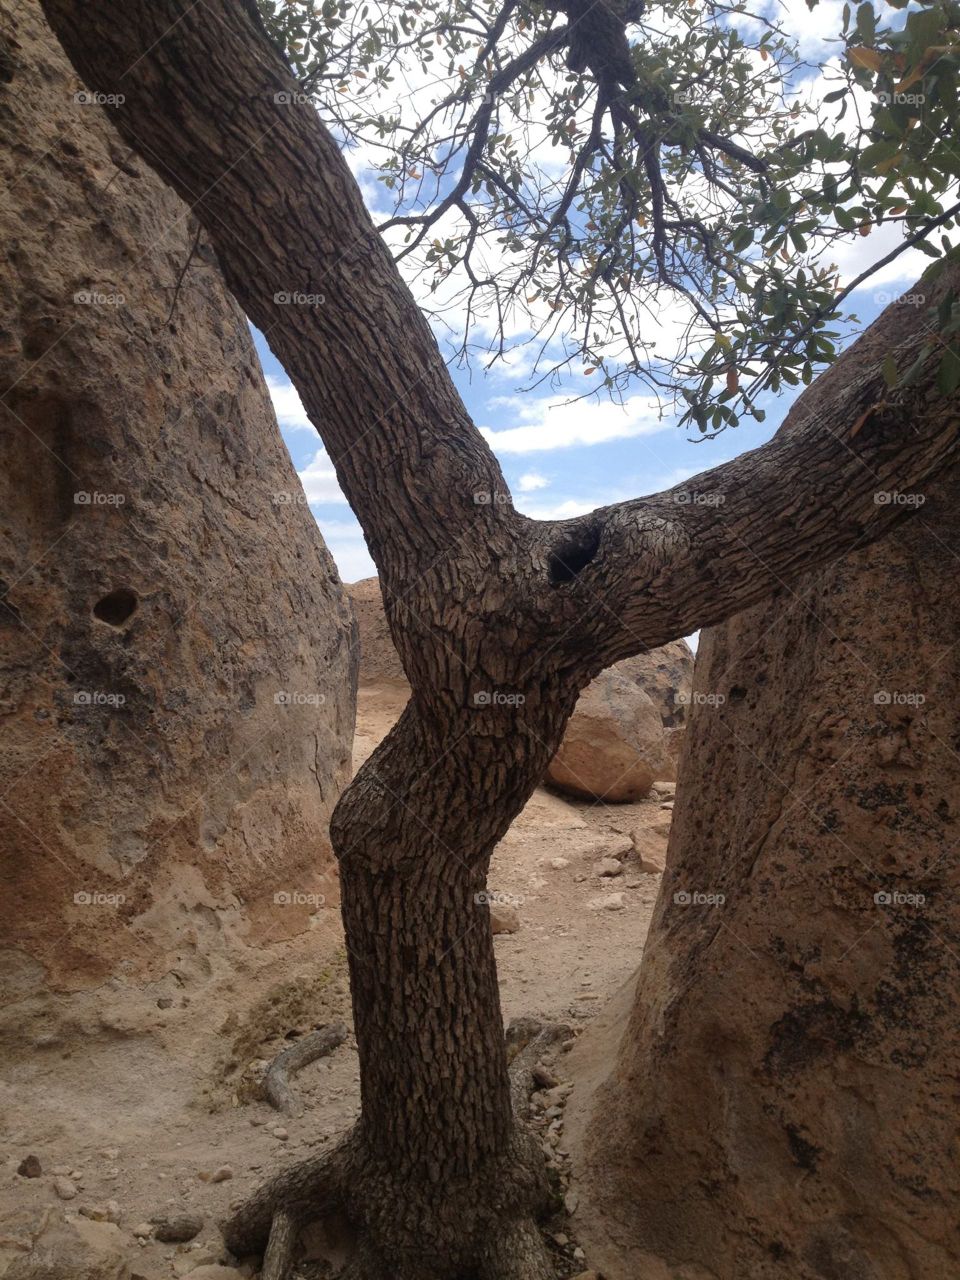 Tight squeeze . Tree growing out of boulder 